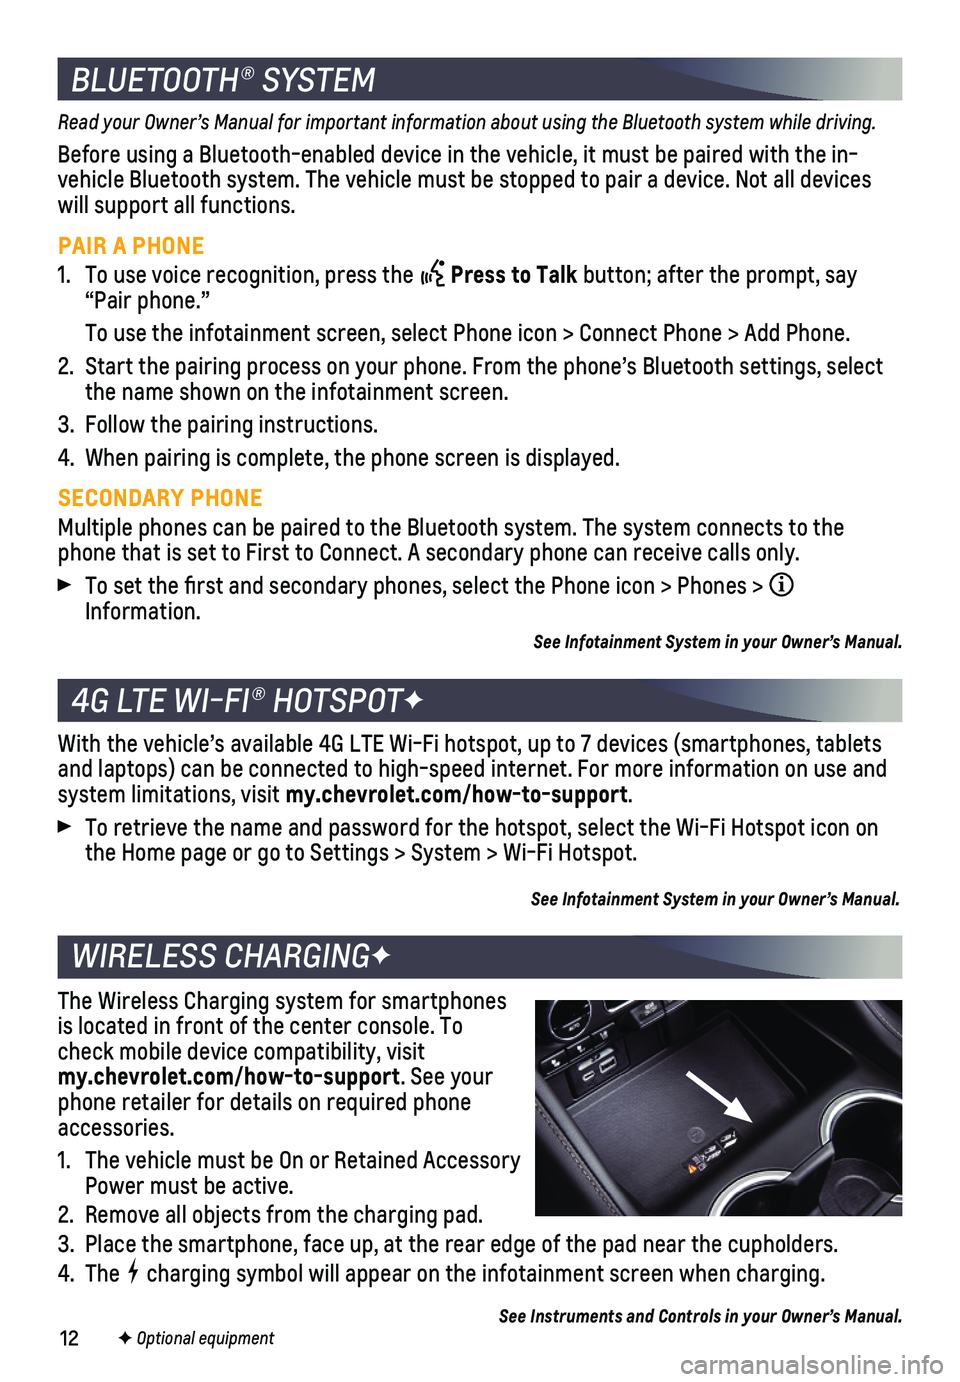 CHEVROLET SUBURBAN 2021  Get To Know Guide 12F Optional equipment       
BLUETOOTH® SYSTEM
Read your Owner’s Manual for important information about using the Bluetooth system while driving.
Before using a Bluetooth-enabled device in the veh